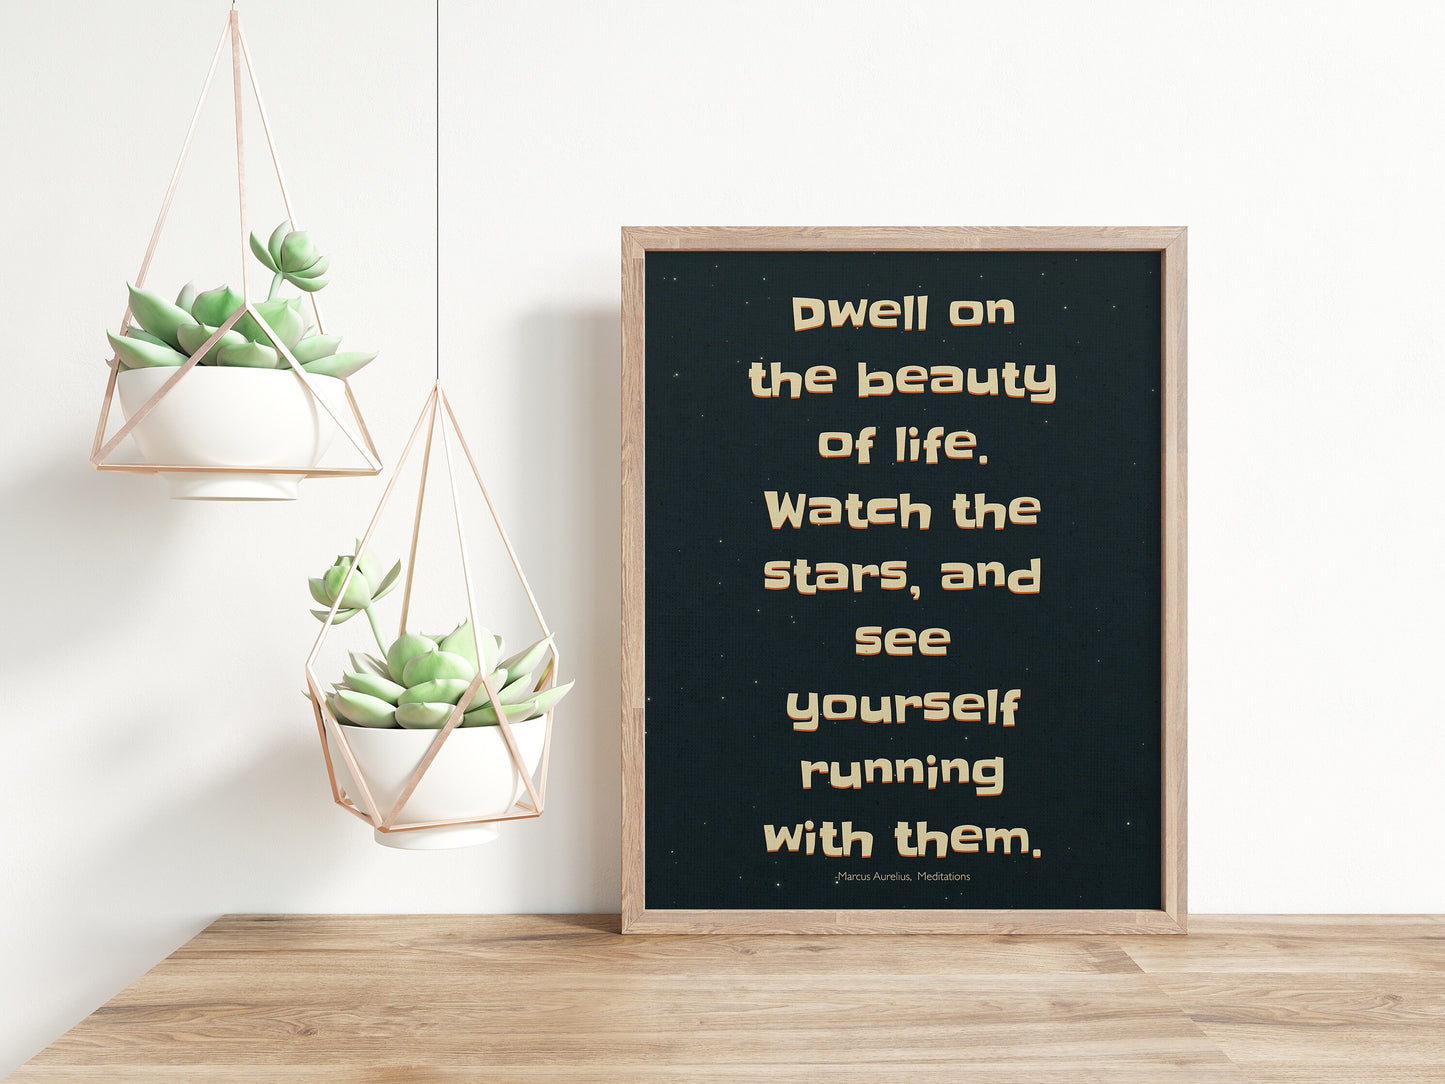 dwell on beauty of life by marcus auelius stoic poster in black, beige & Orange in wood frame